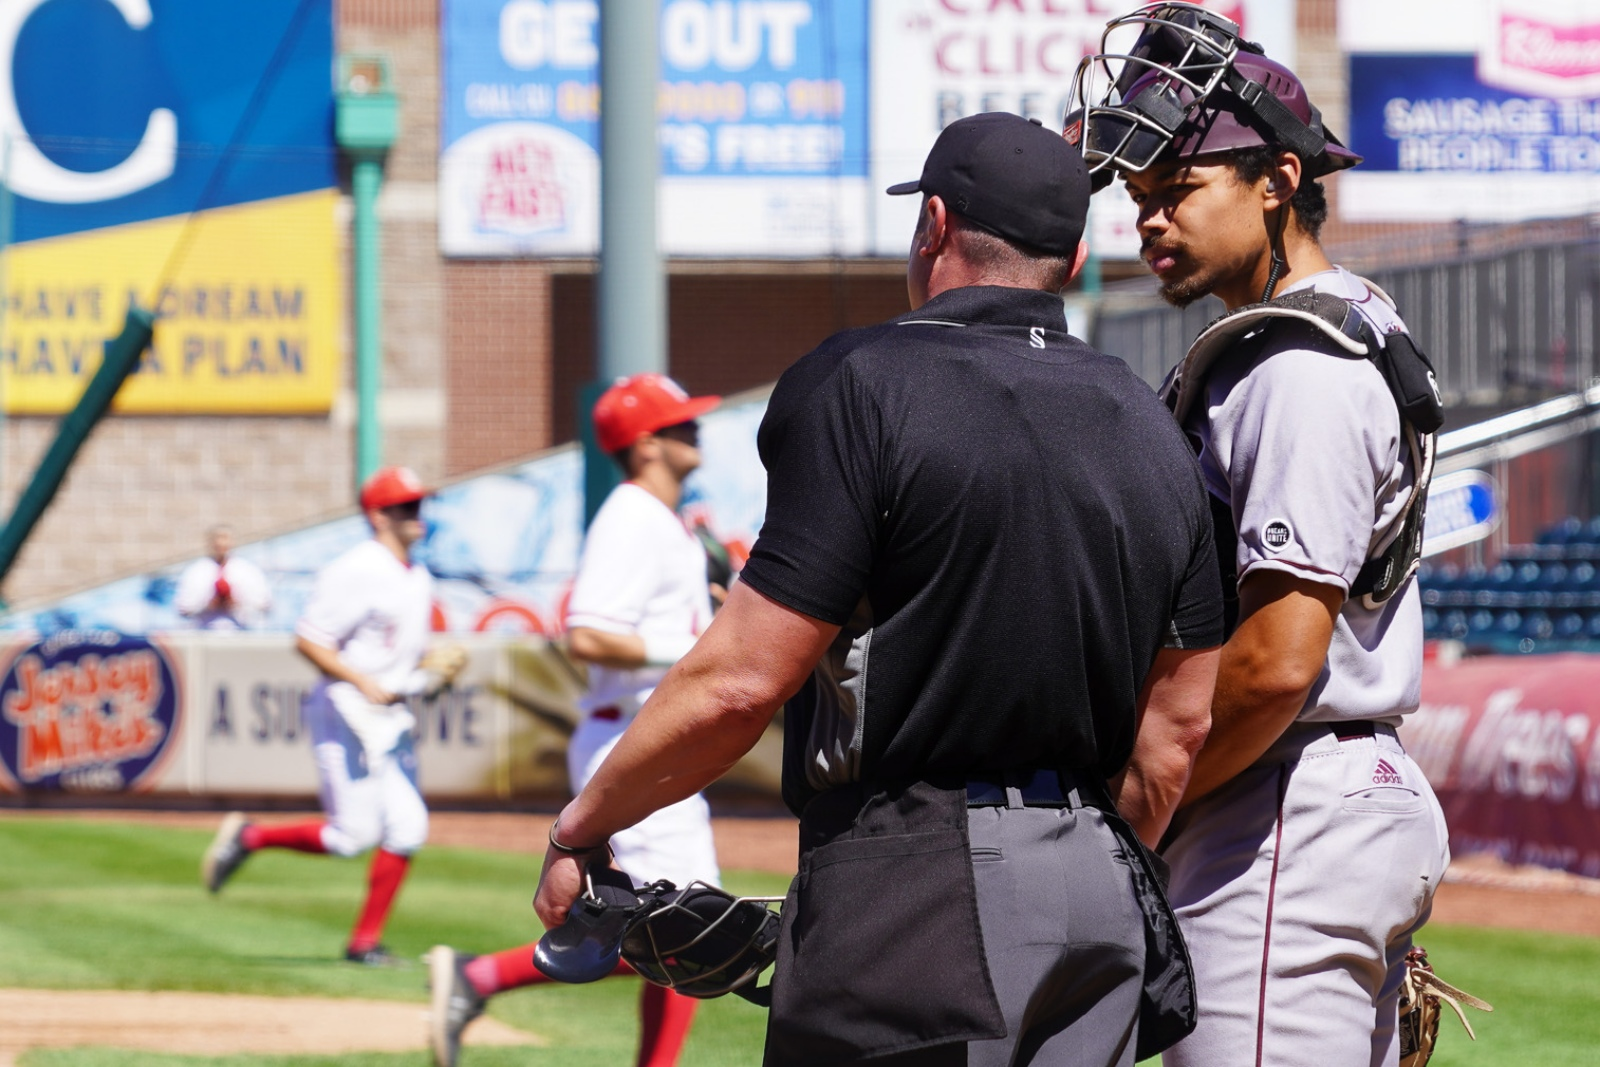 Drake Baldwin, wearing a Missouri State baseball uniform and catcher's gear, talks to the home plate umpire during a break in a game at Hammons Field in Springfield, Missouri.